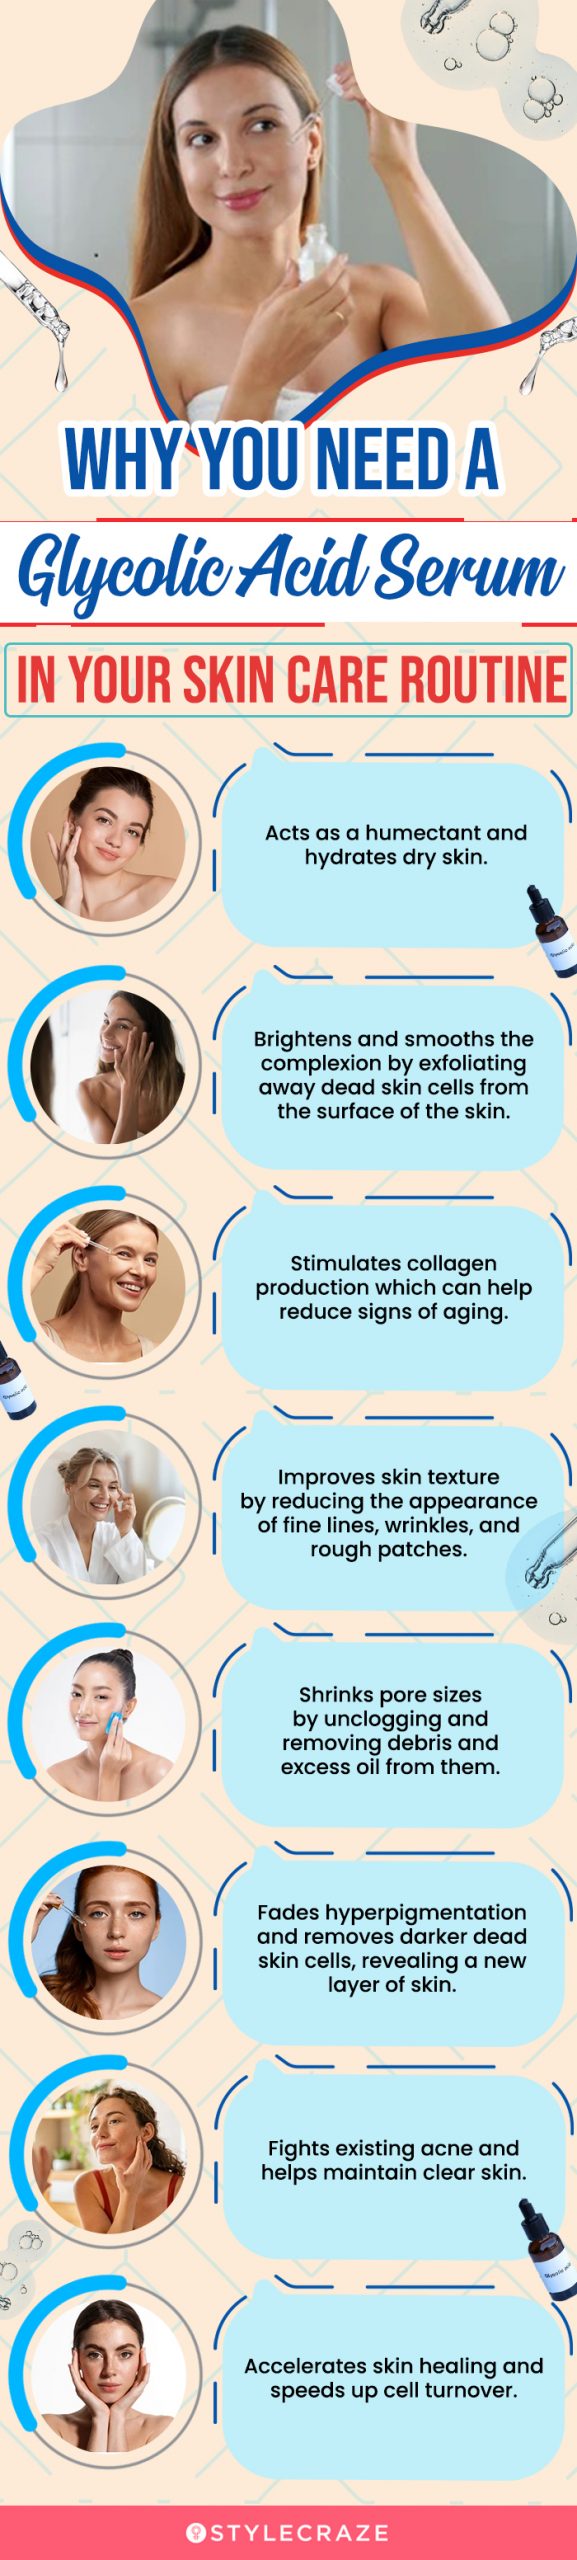 Why You Need A Glycolic Acid Serum In Your Skin Care Routine (infographic)